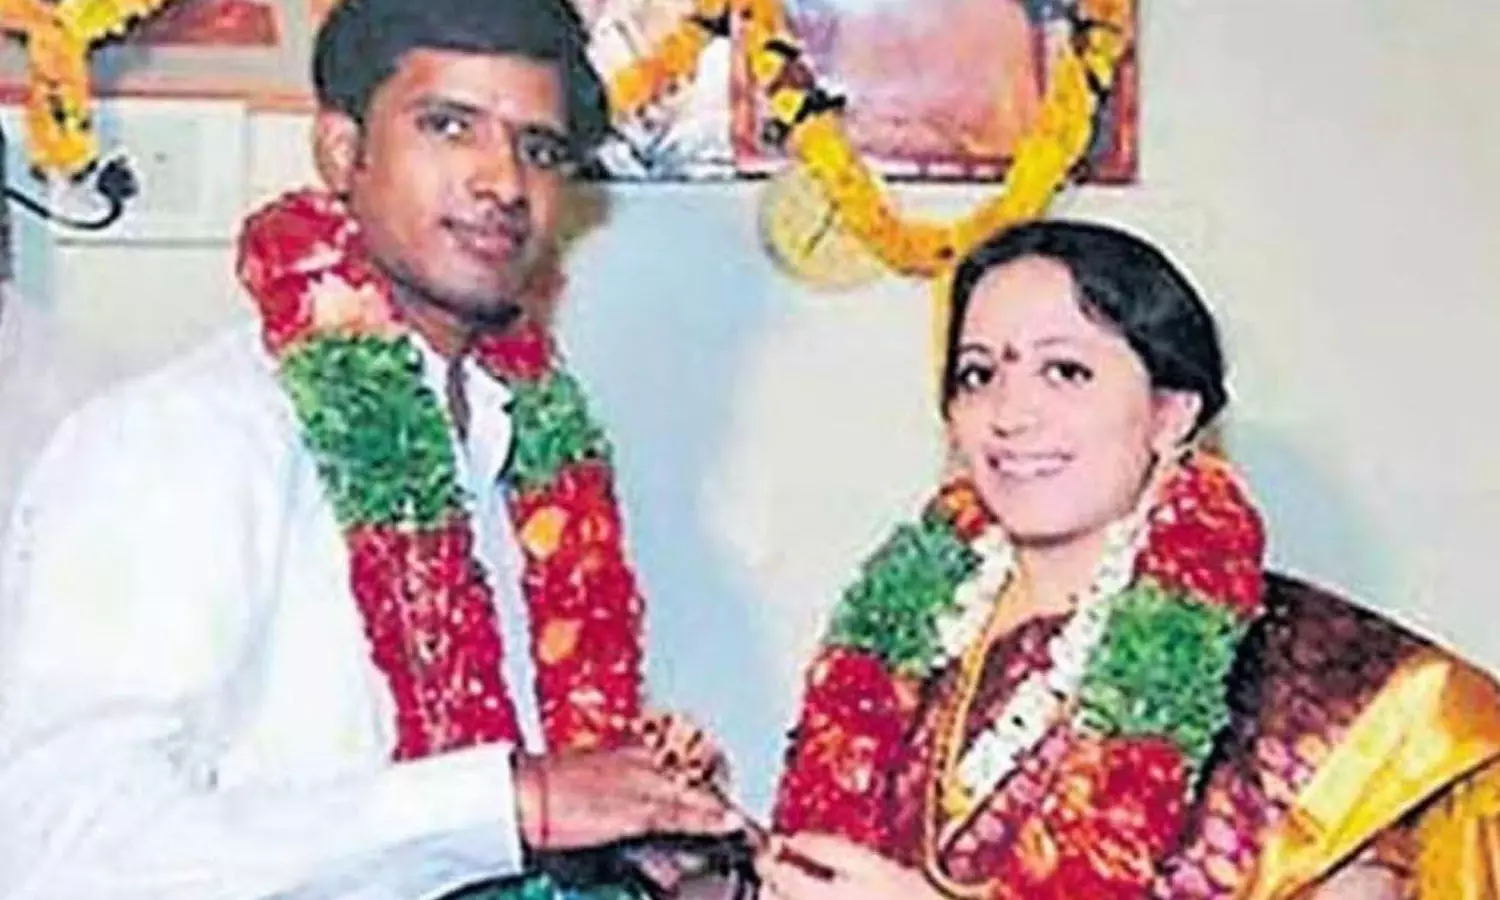 Lawyer locks up wife in a dark room for 11 years in Vizianagaram, arrested